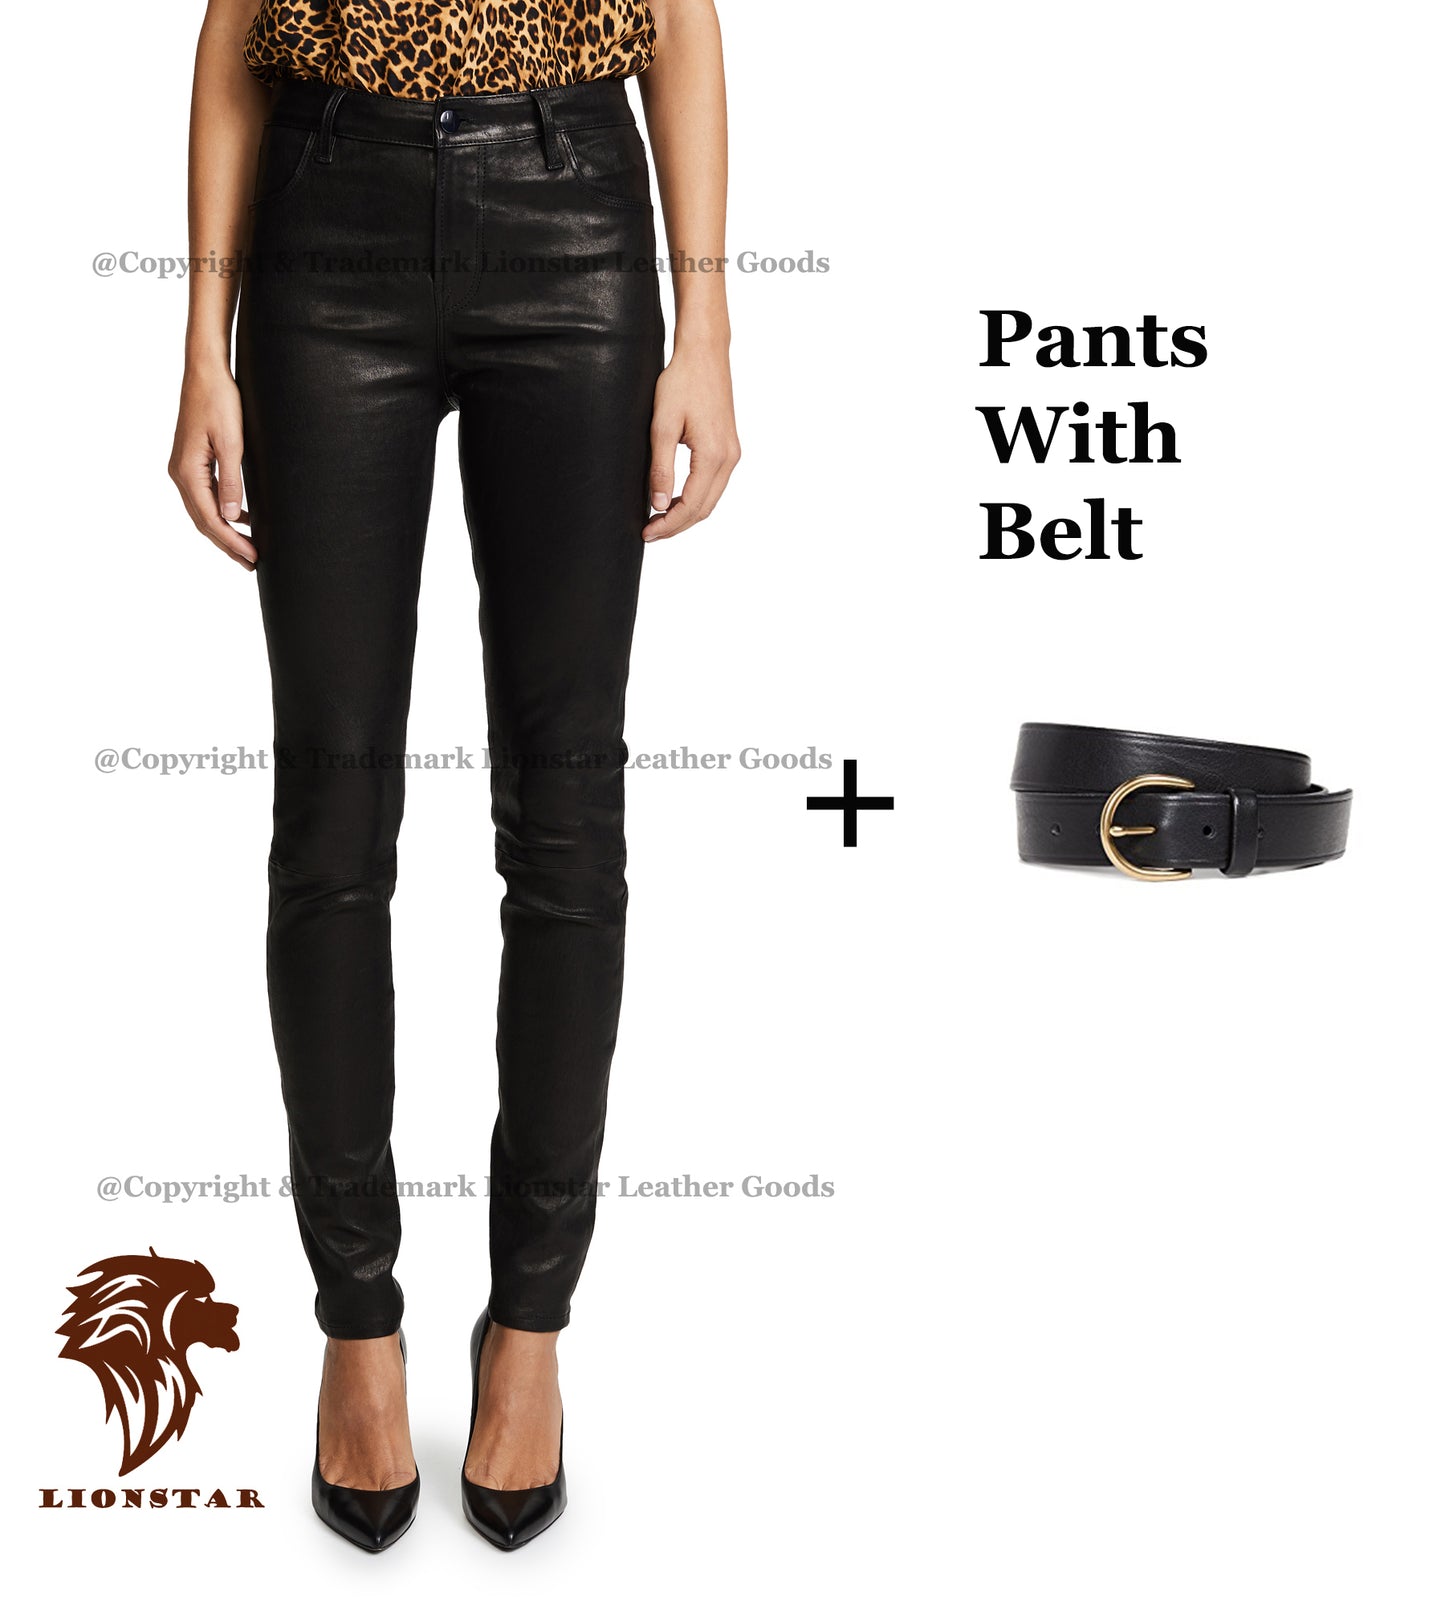 Black Leather Pants with Belt